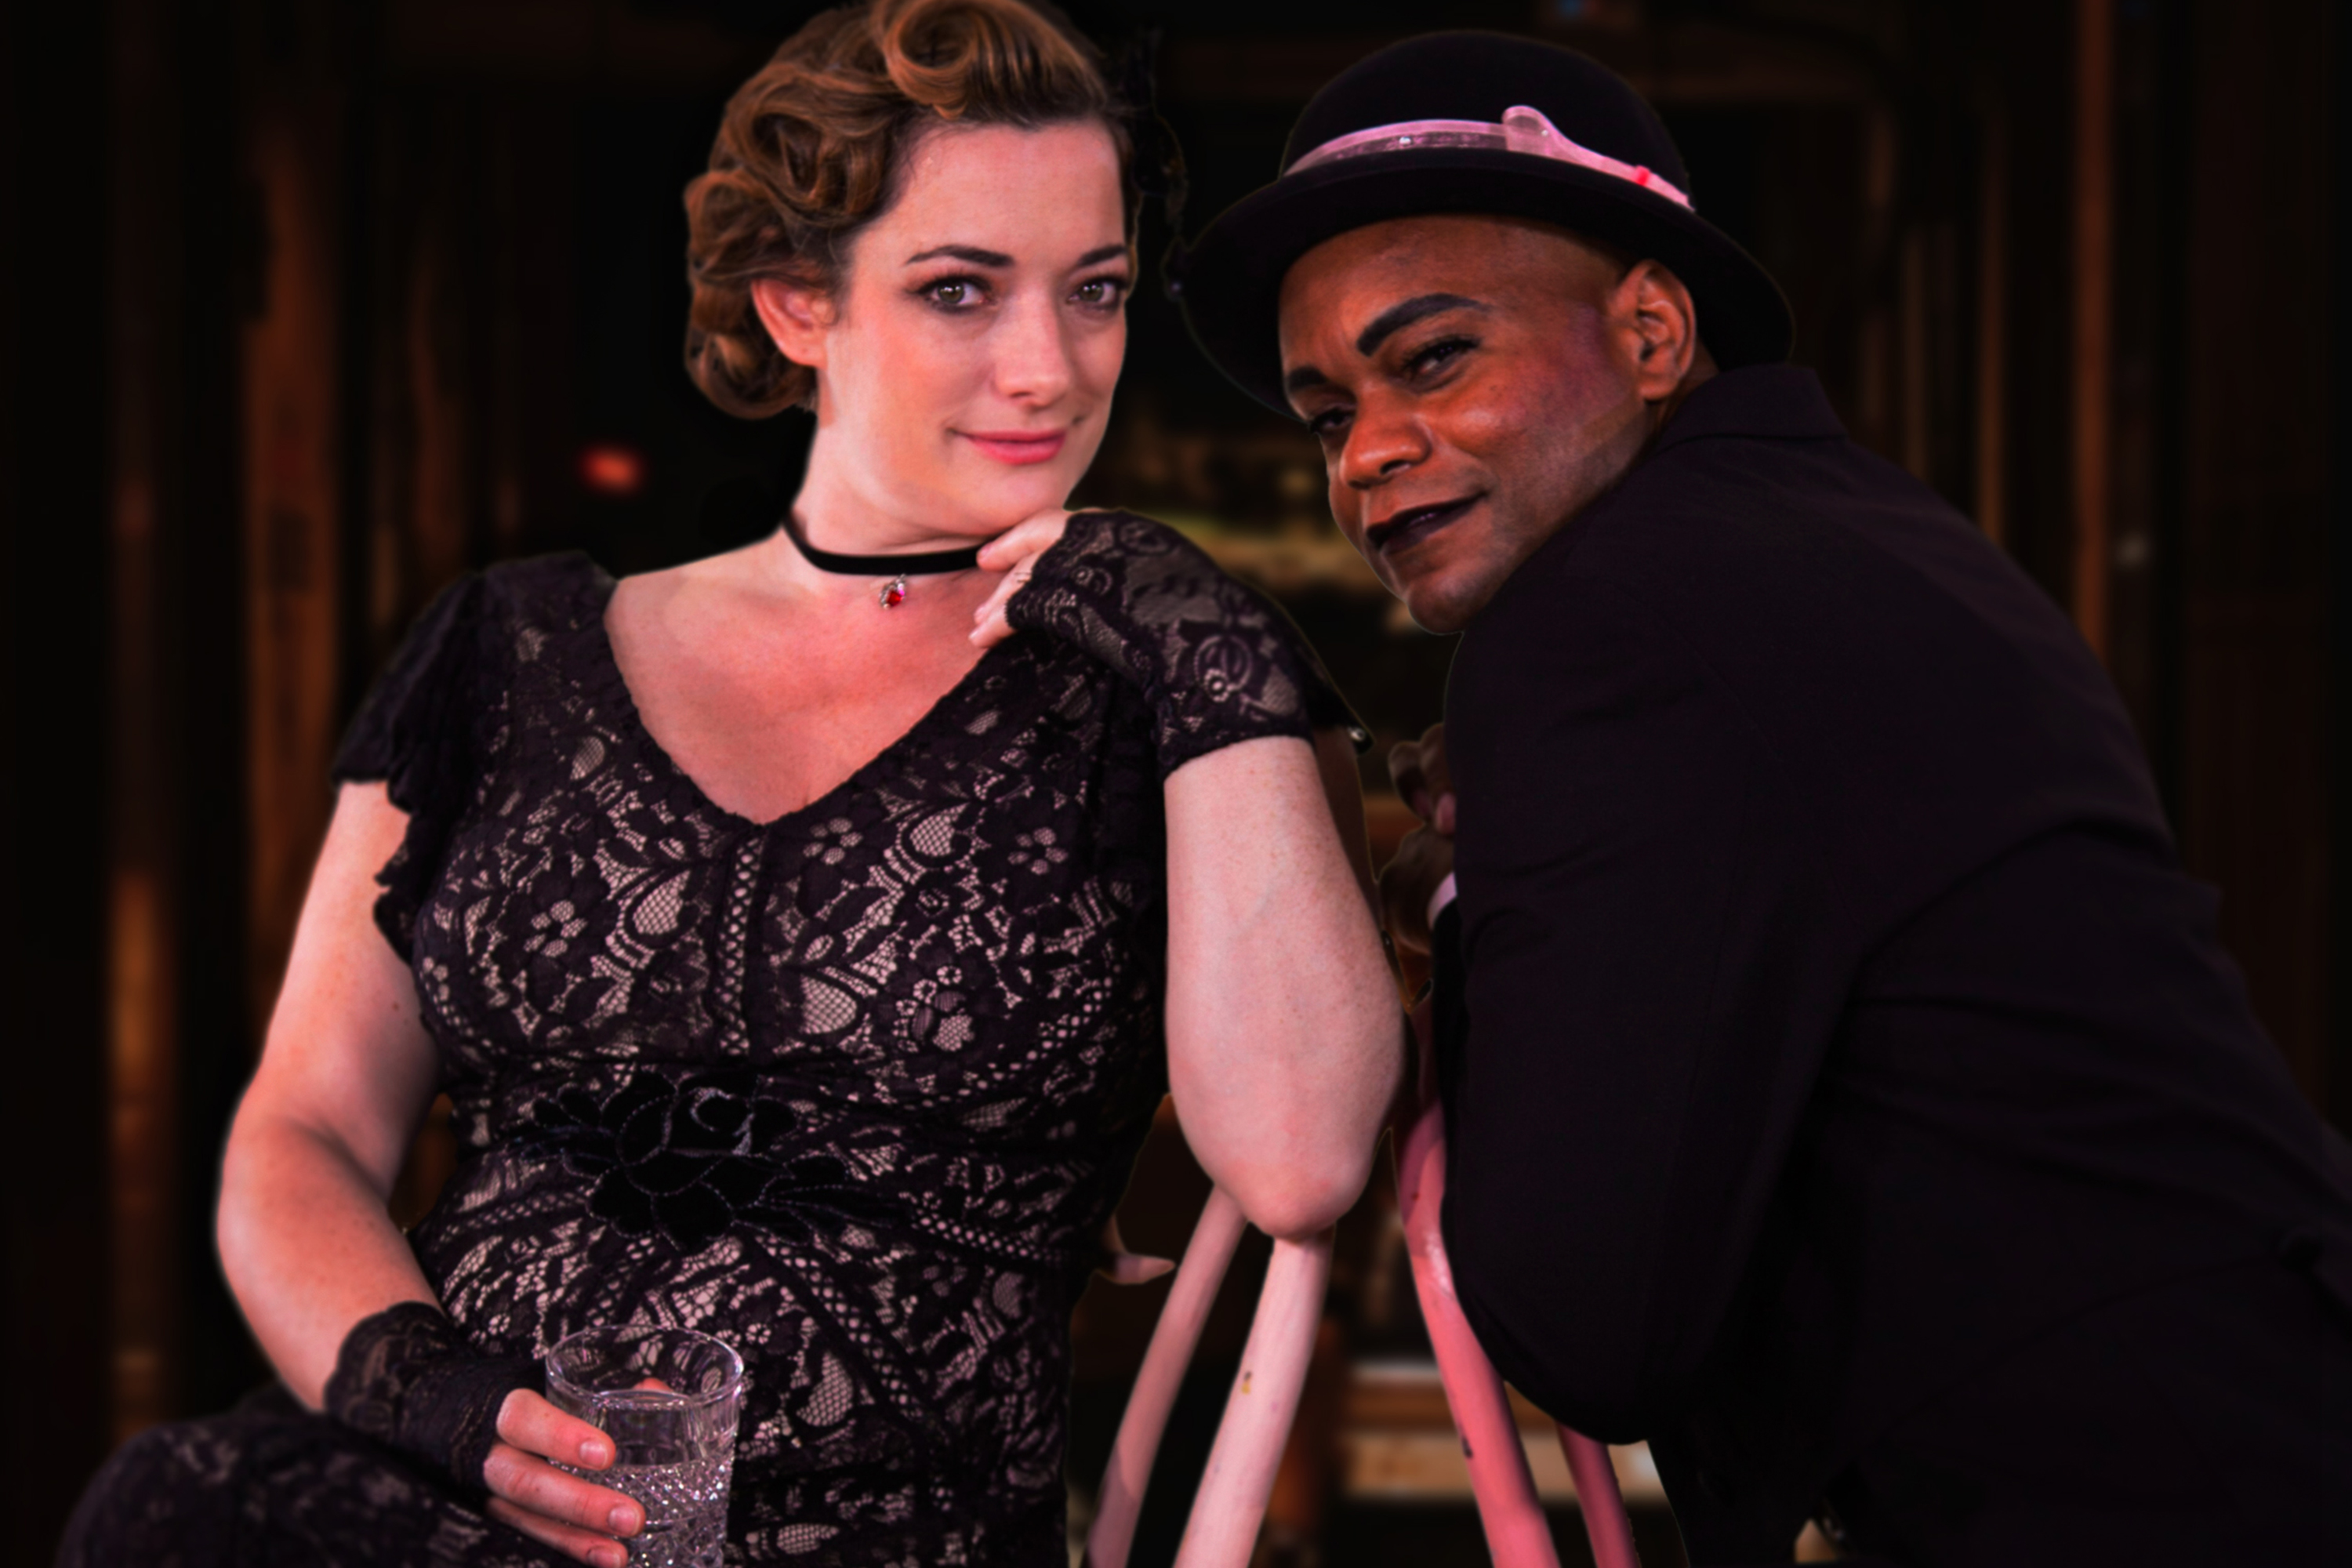 Olivier Award winner Laura Michelle Kelly, left, stars as Sally Bowles and Forrest McClendon as Emcee, in the Nutmeg Summer production of 'Cabaret,' on stage at Connecticut Repertory Theatre July 4-21. (Jean Samedi for UConn)